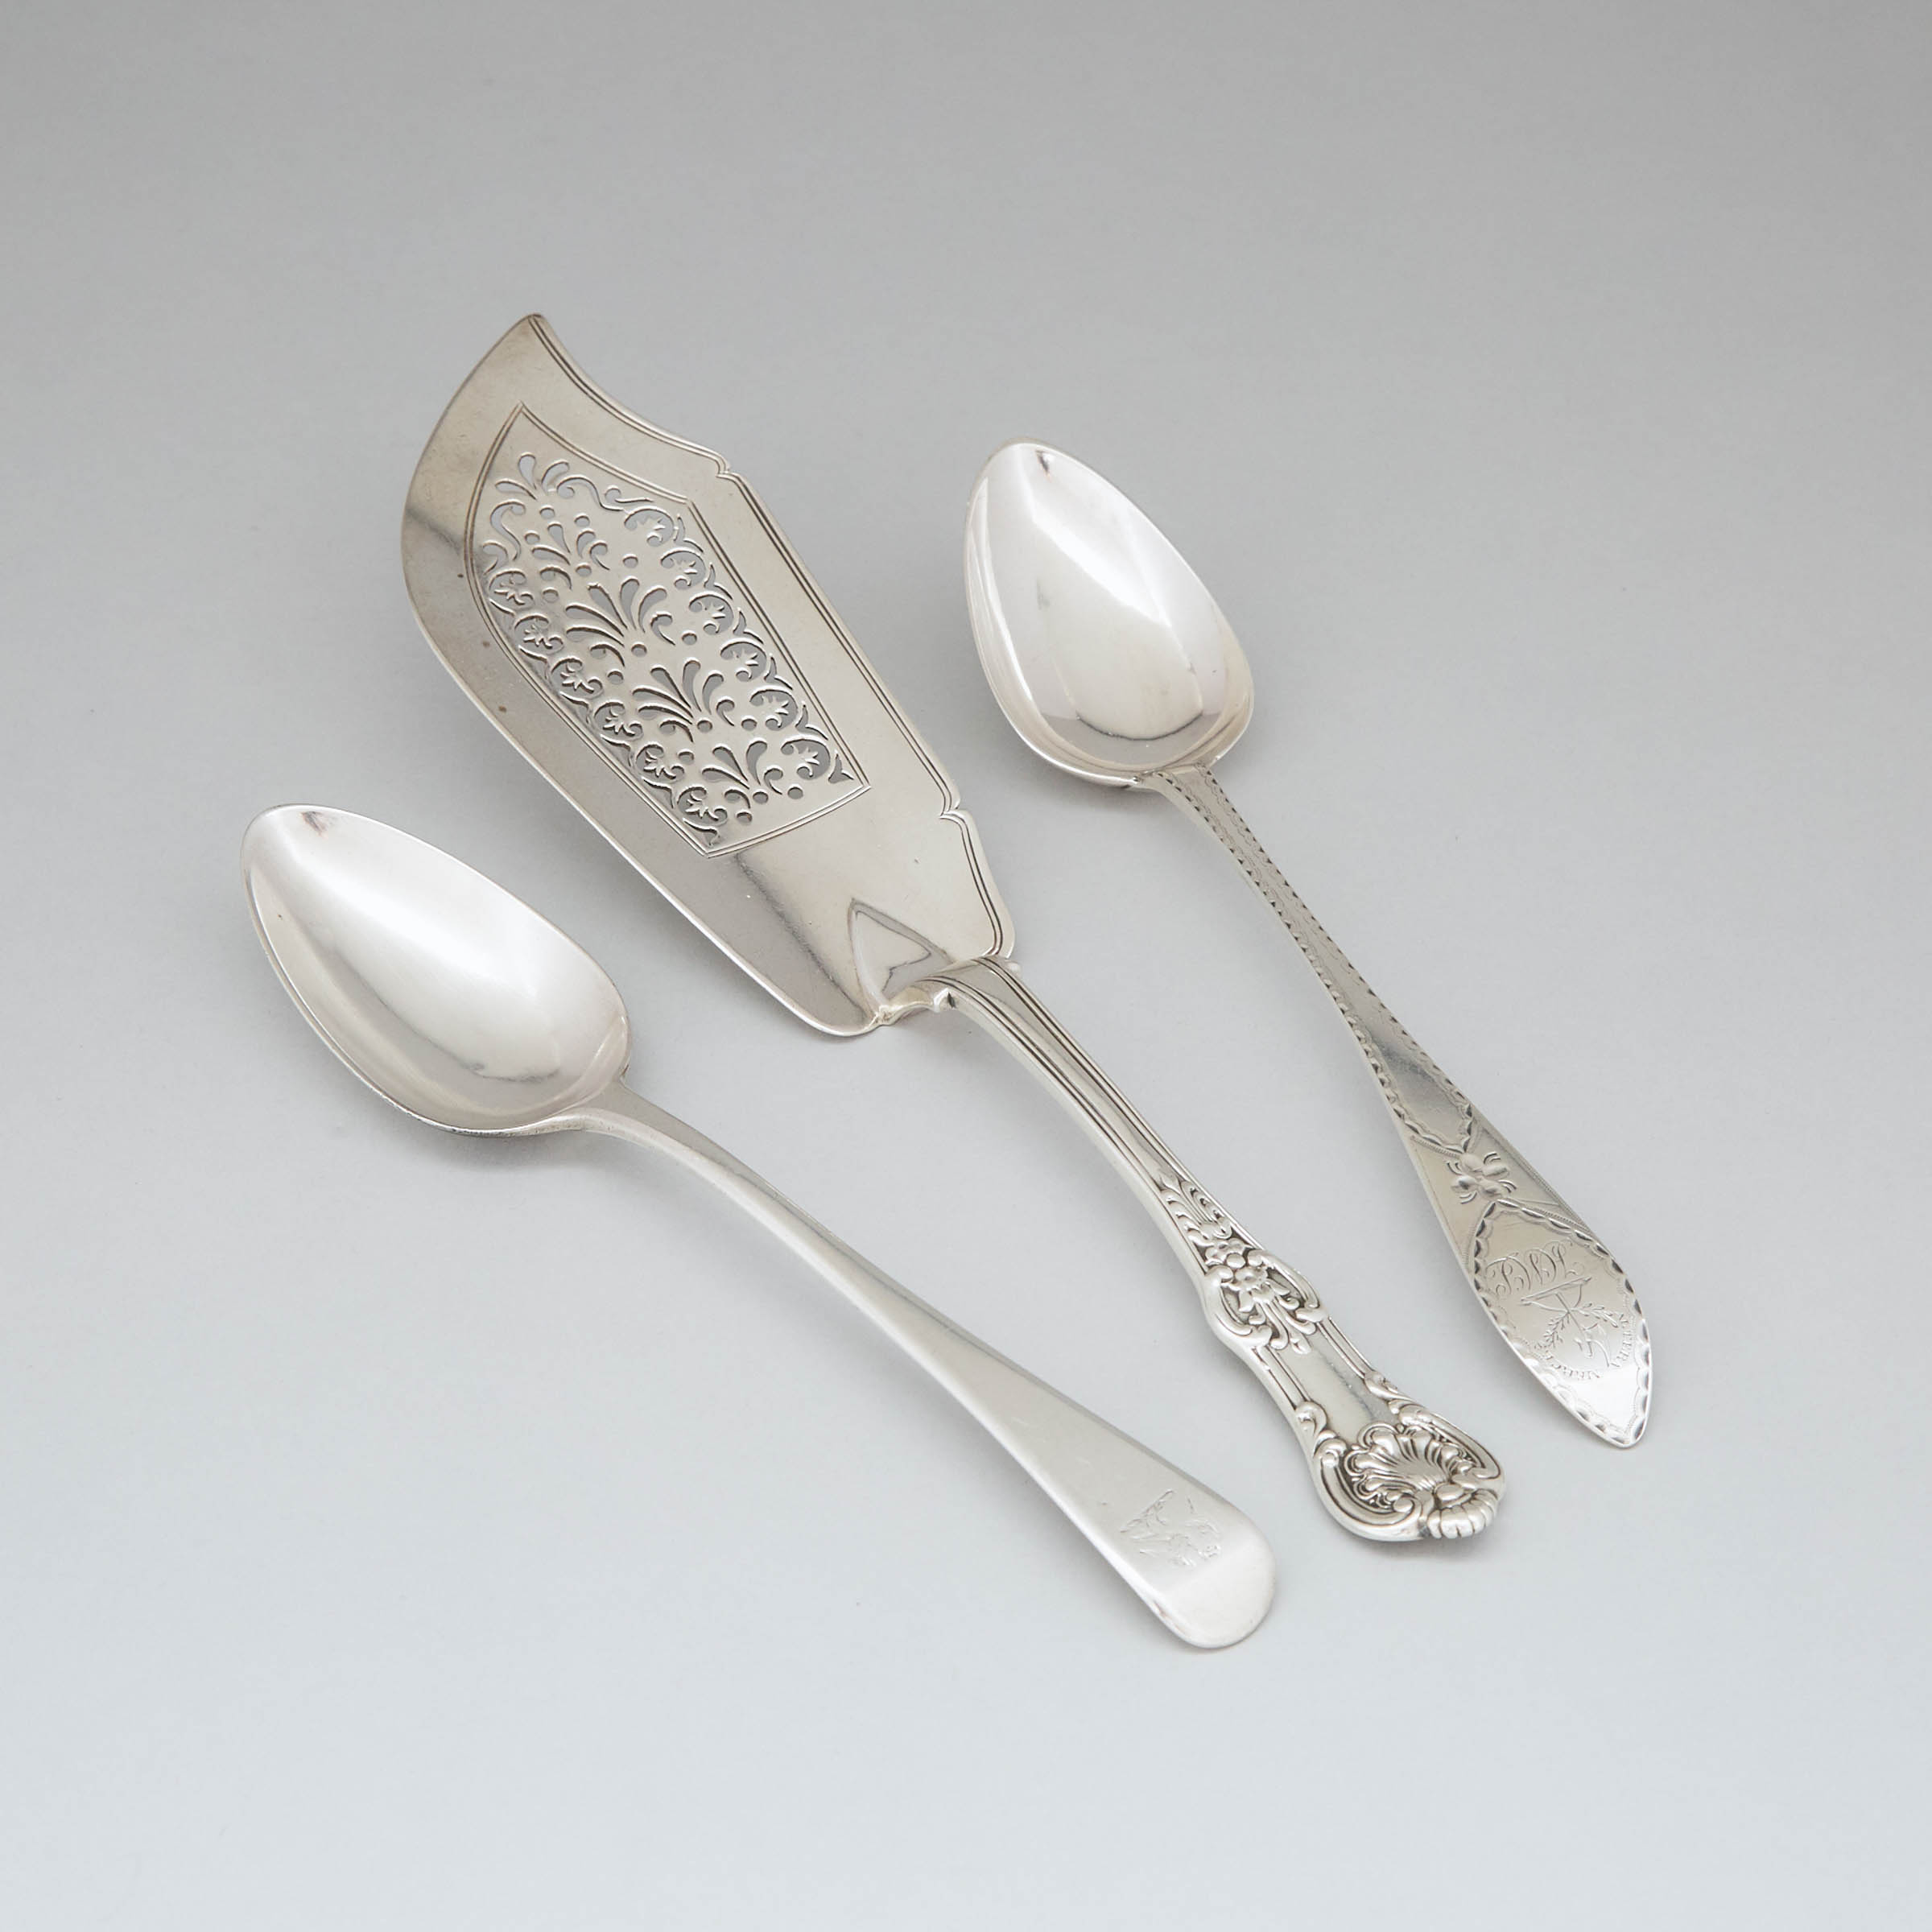 Two George III Silver Table Spoons, Francis Howden, Edinburgh, 1790 and George Smith III & William Fearn, London, 1794 and a Victorian Queens Pattern Fish Slice, William Theobalds & Robert Atkinson, London, 1839